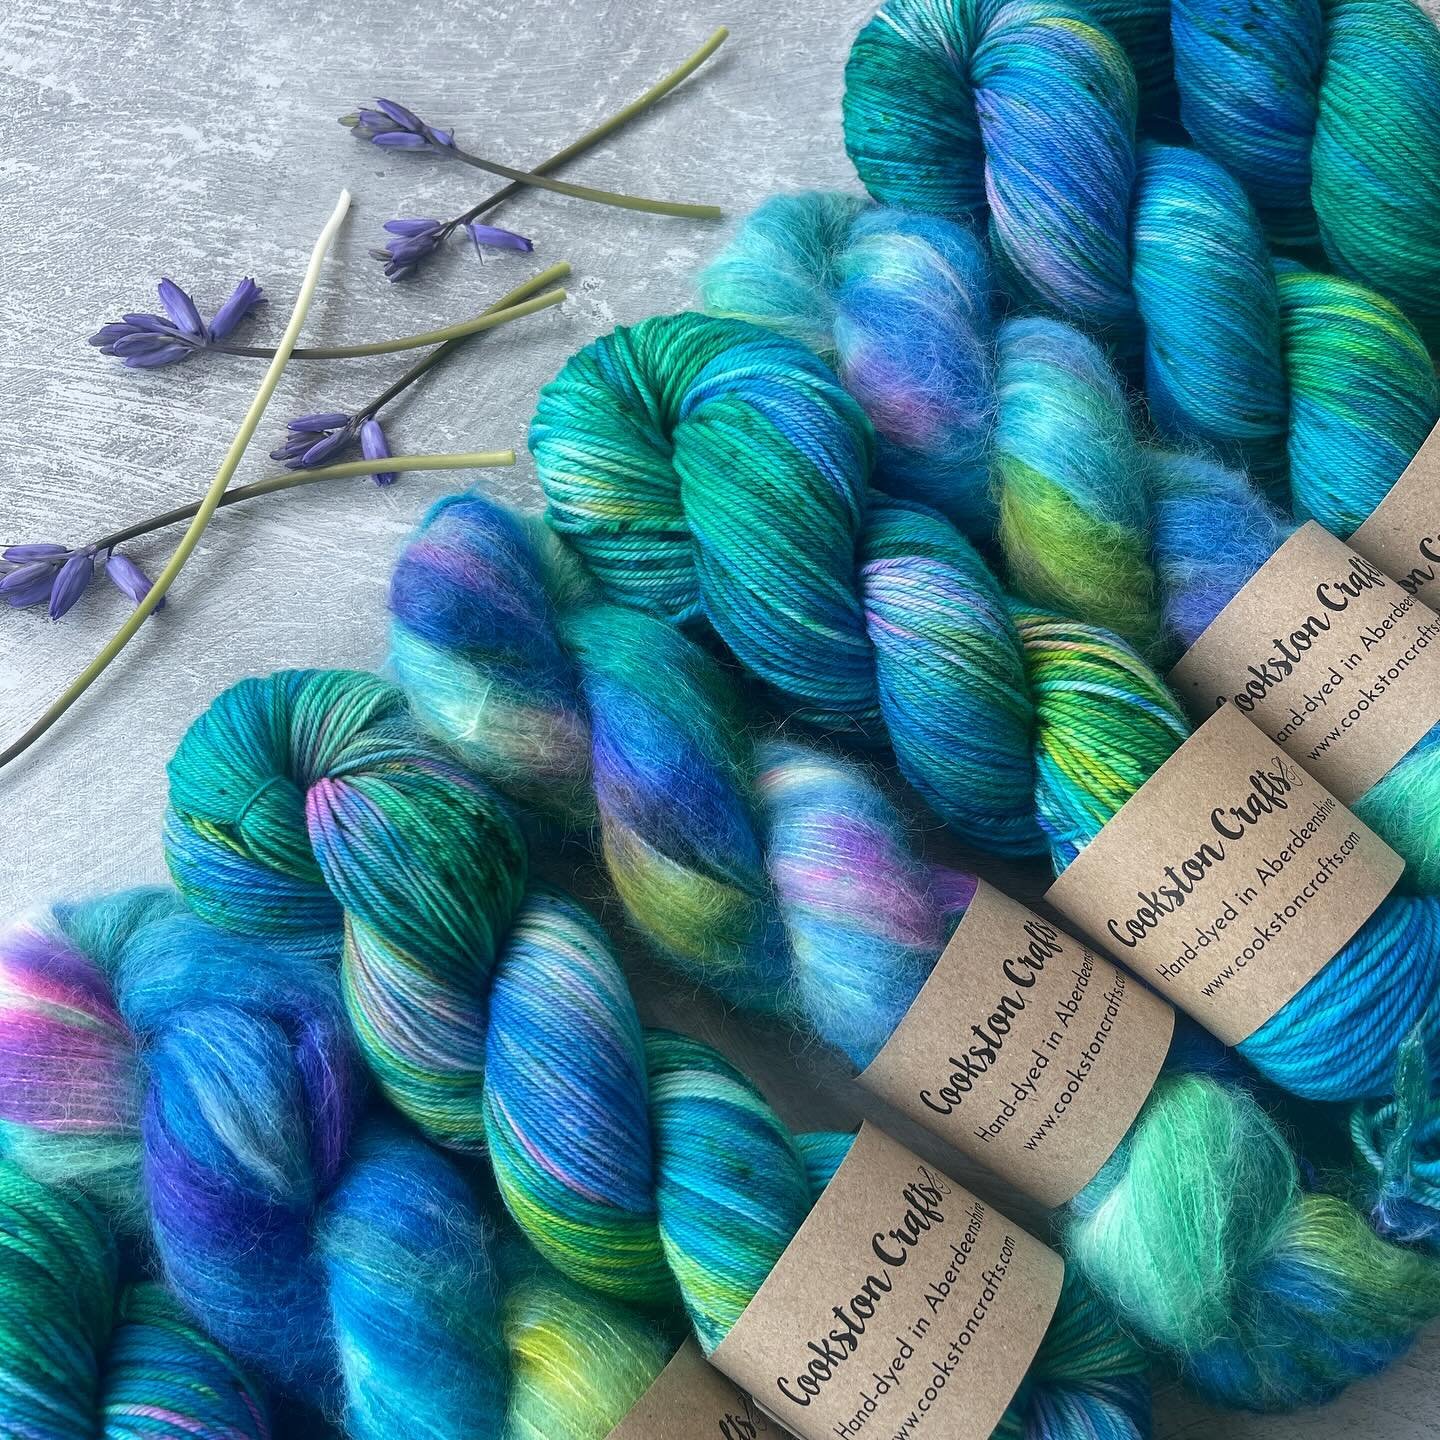 Peacock is back in stock 🦚 

It&rsquo;s available on fingering and double knit Merino Nylon and also suri alpaca laceweight yarn. 

This was originally a Treat Box yarn from last year but it&rsquo;s become a firm favourite - I&rsquo;ve included some